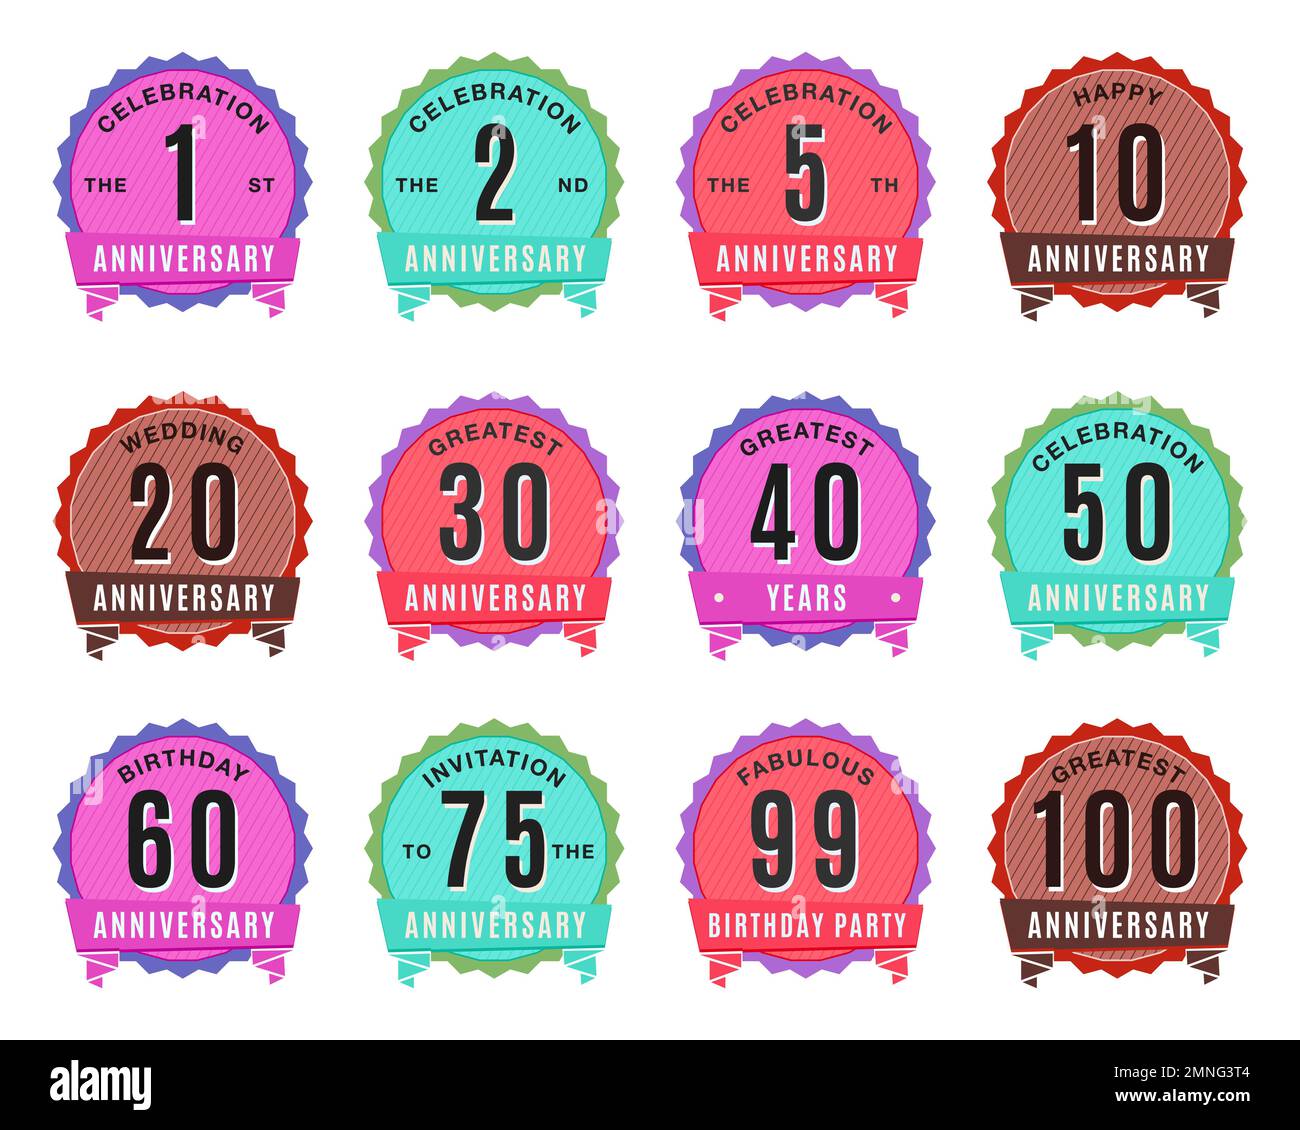 Anniversary Logo Templates Set. Wedding badges in flat modern style and different color palletes. Birthday anniversary labels. Stock vector designs. Stock Vector